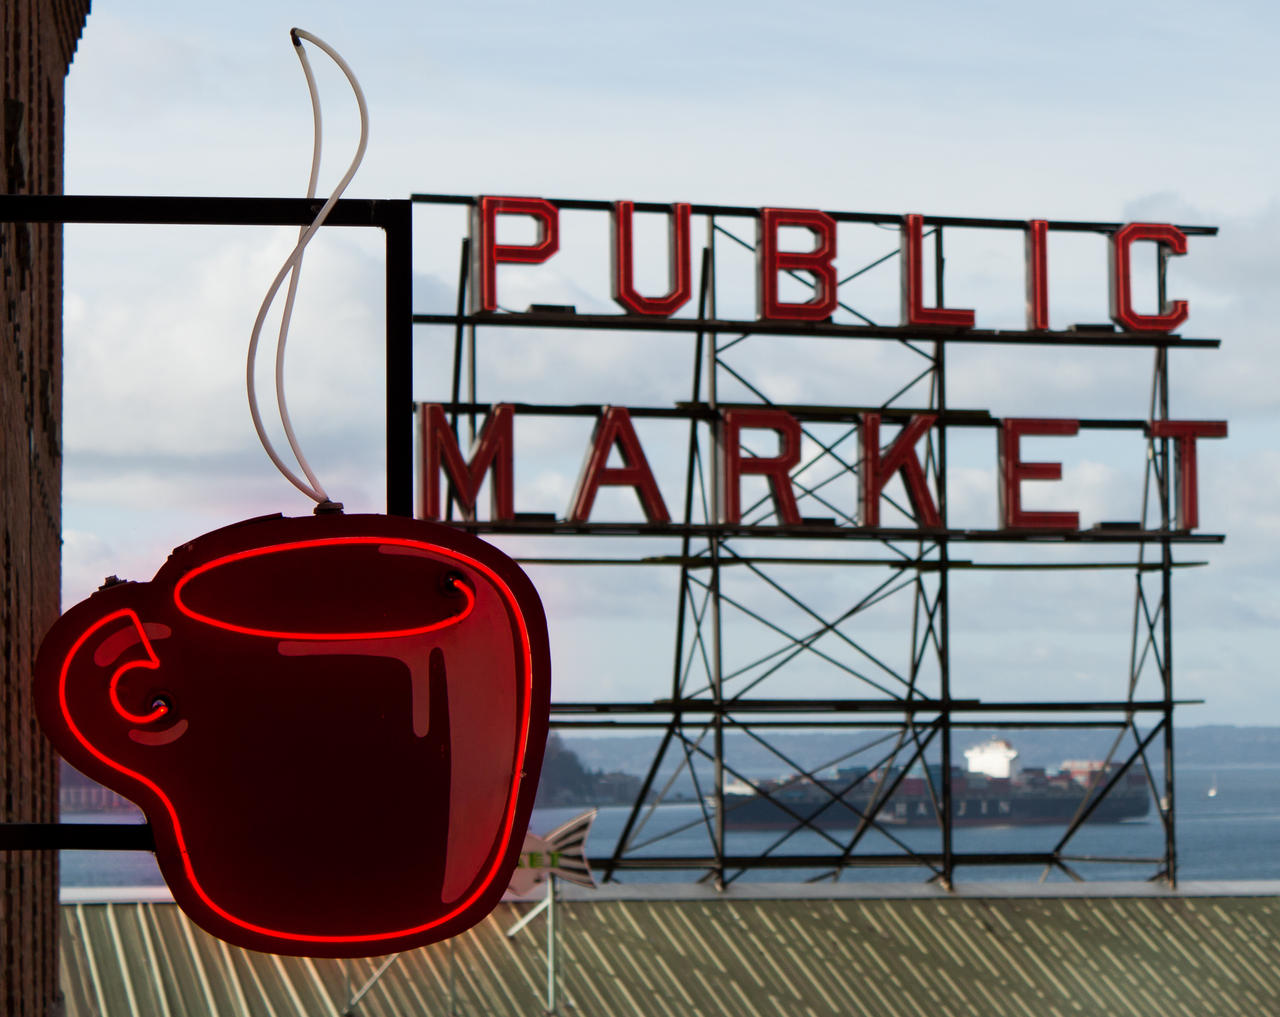 Pike's place